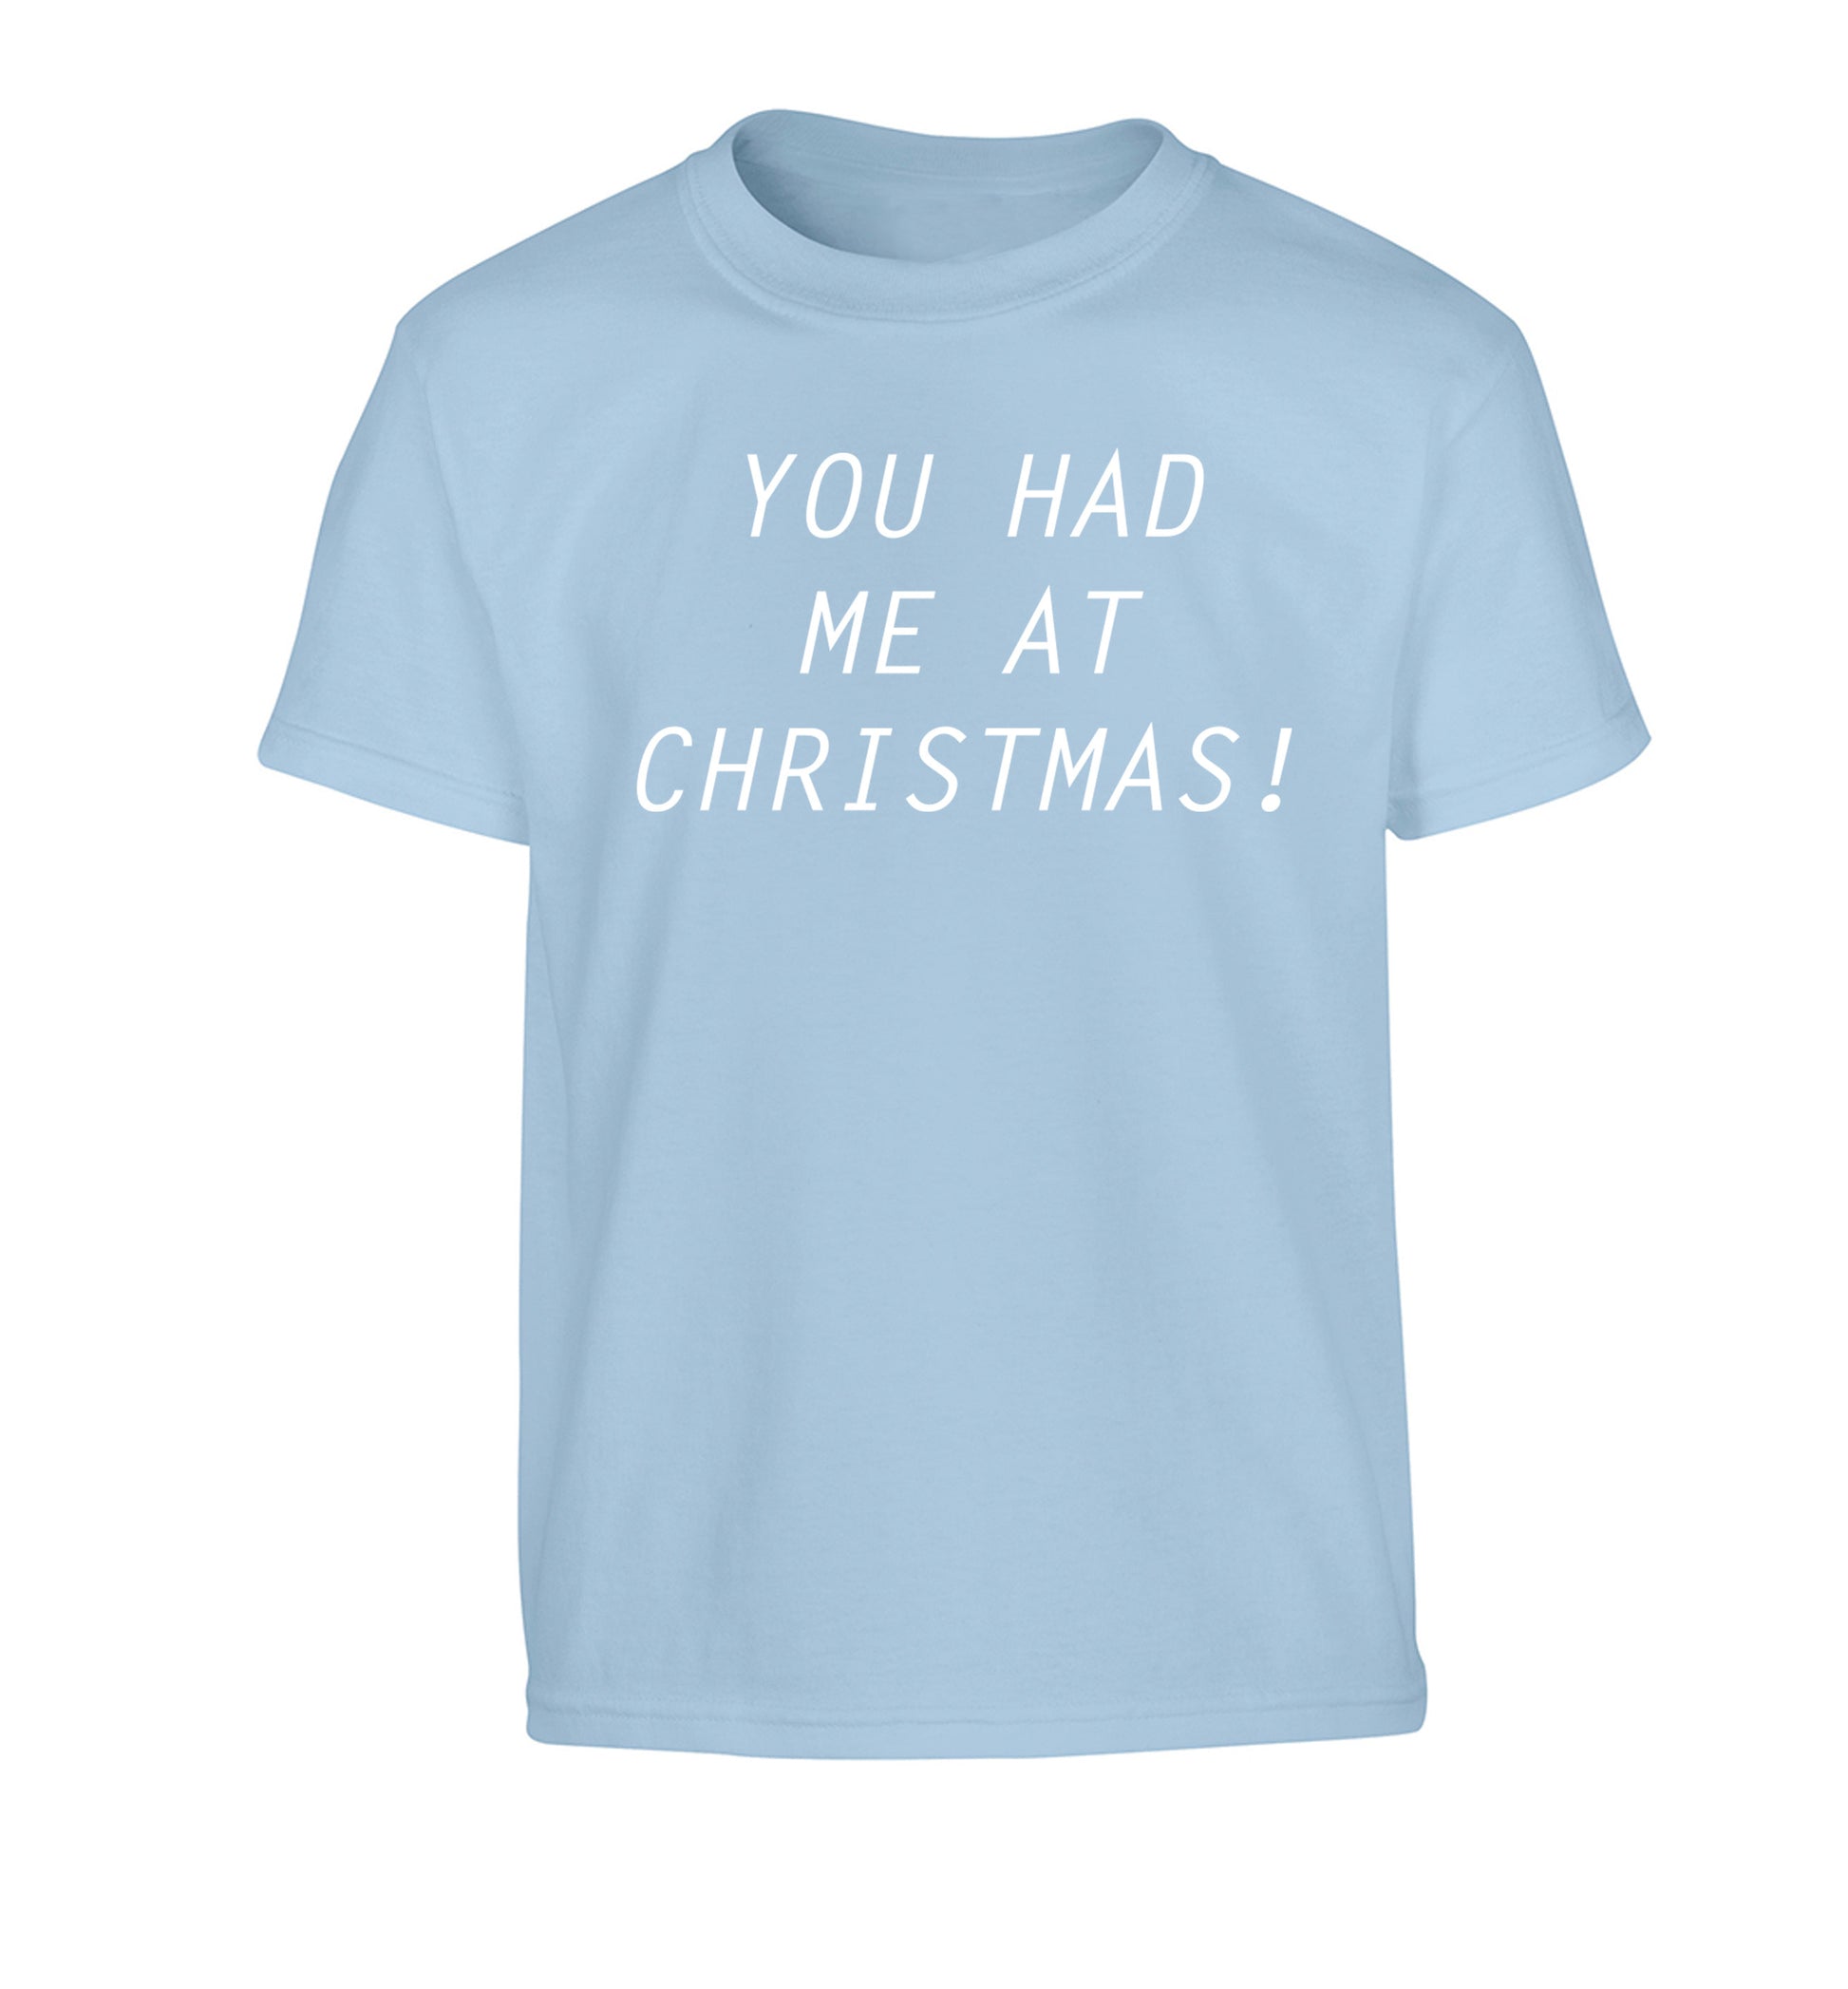 You had me at Christmas Children's light blue Tshirt 12-14 Years